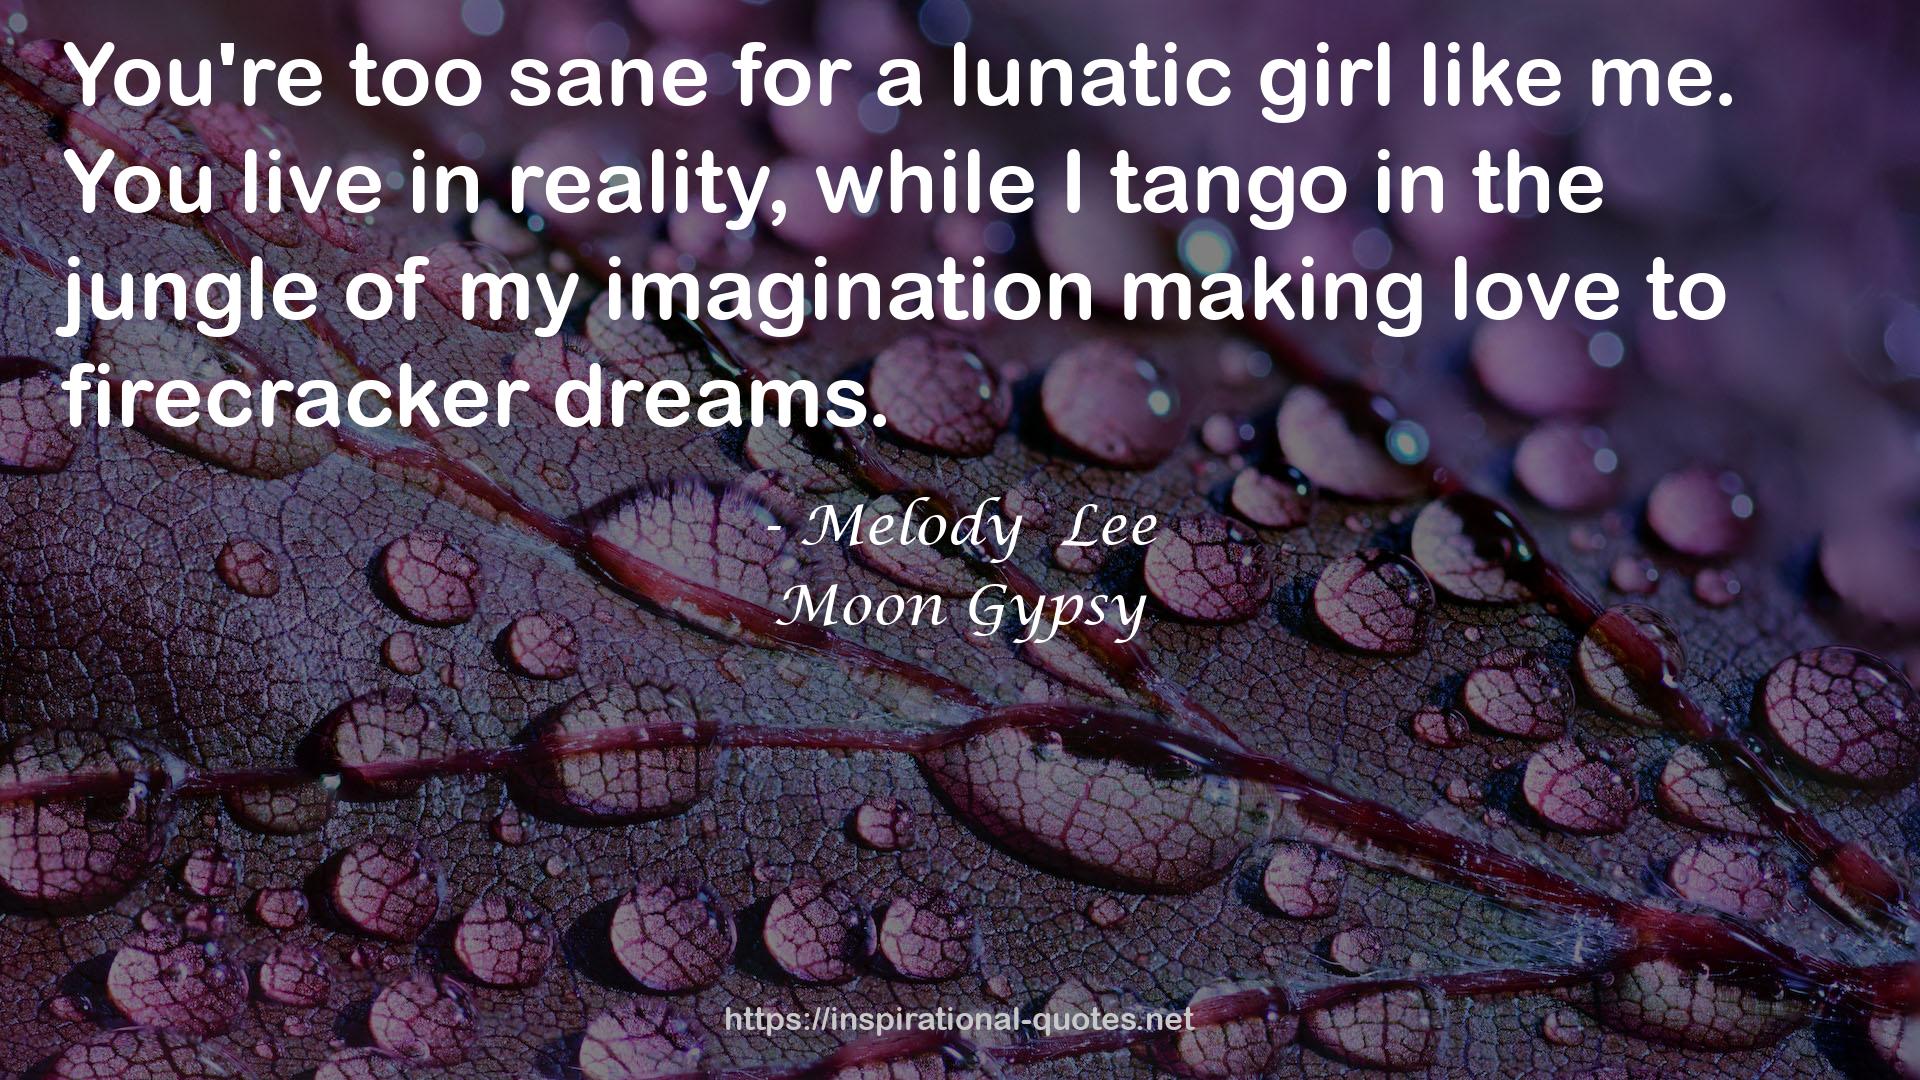 a lunatic girl  QUOTES